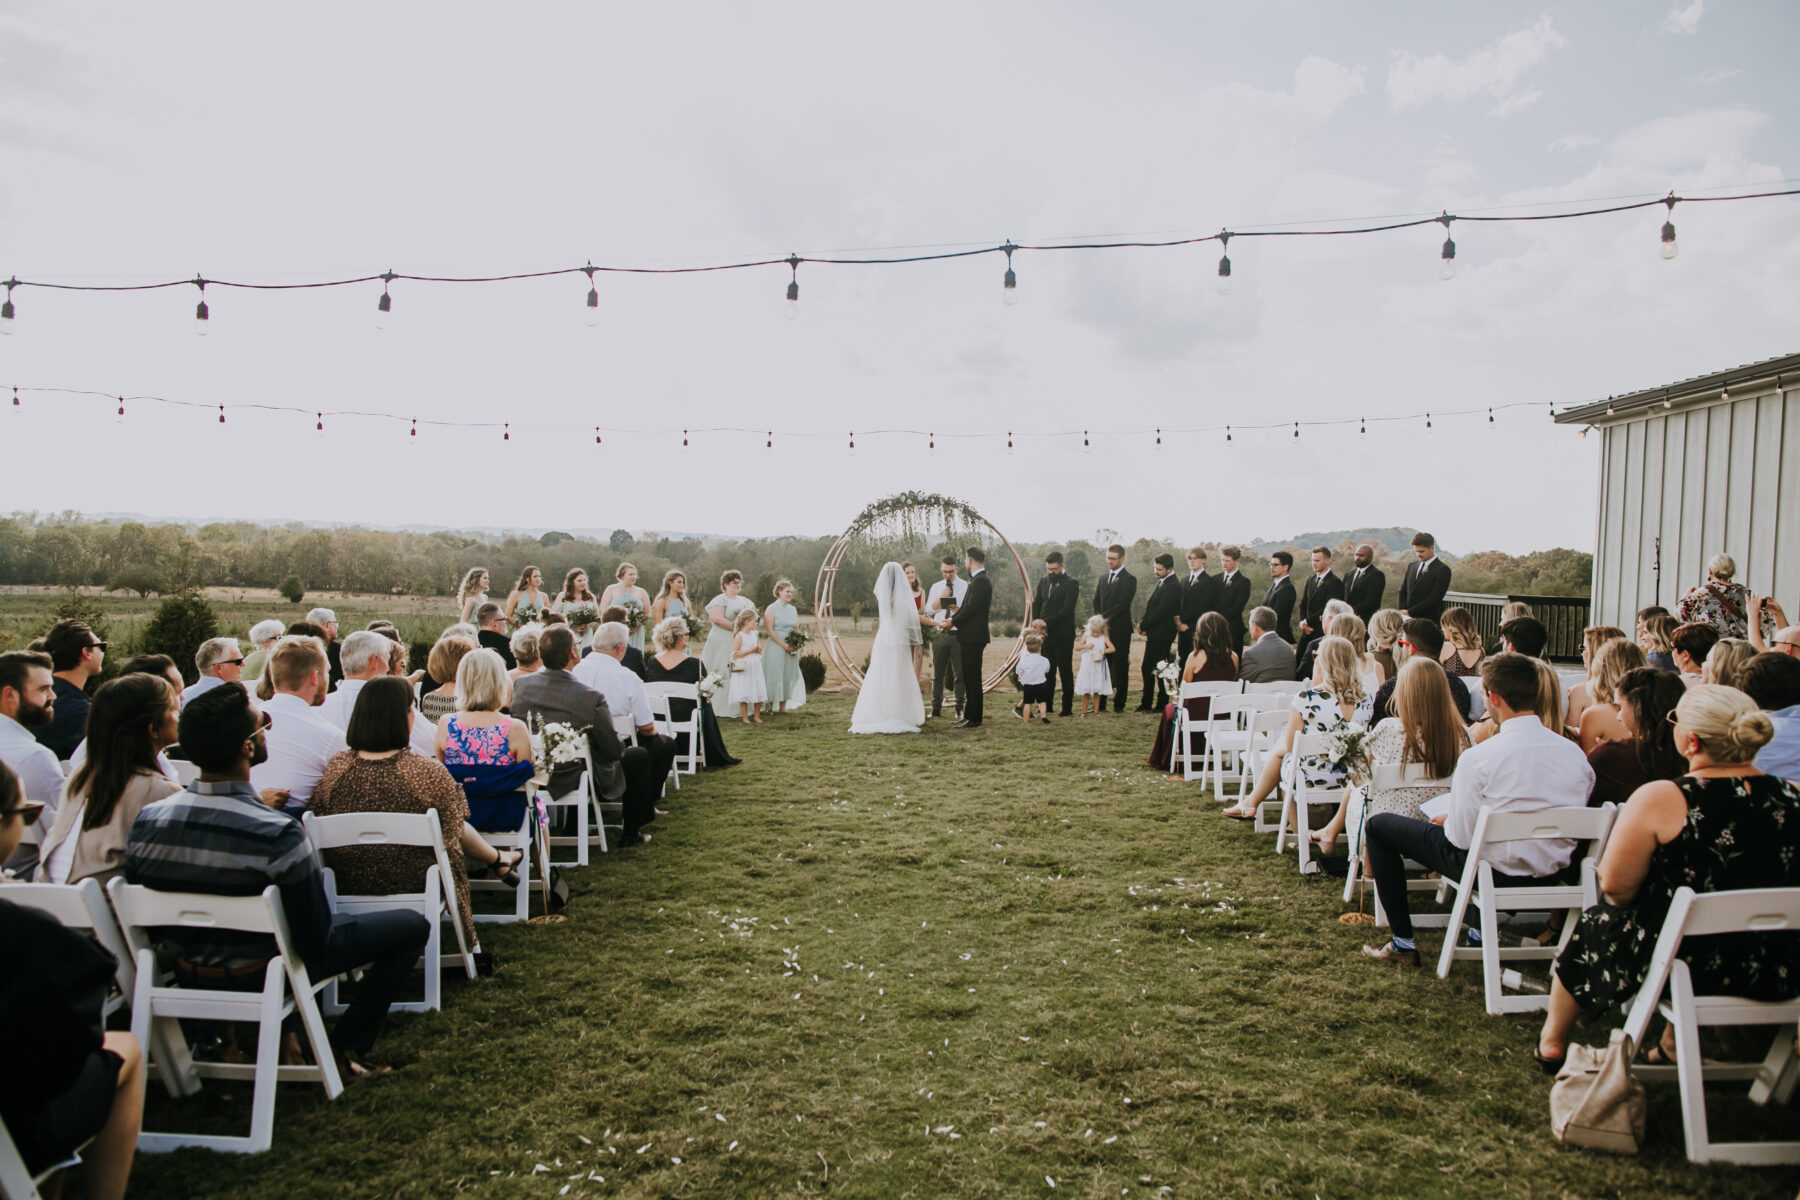 Outdoor wedding inspiration: Nashville Wedding with Beautiful Views by Teale Photography featured on Nashville Bride Guide